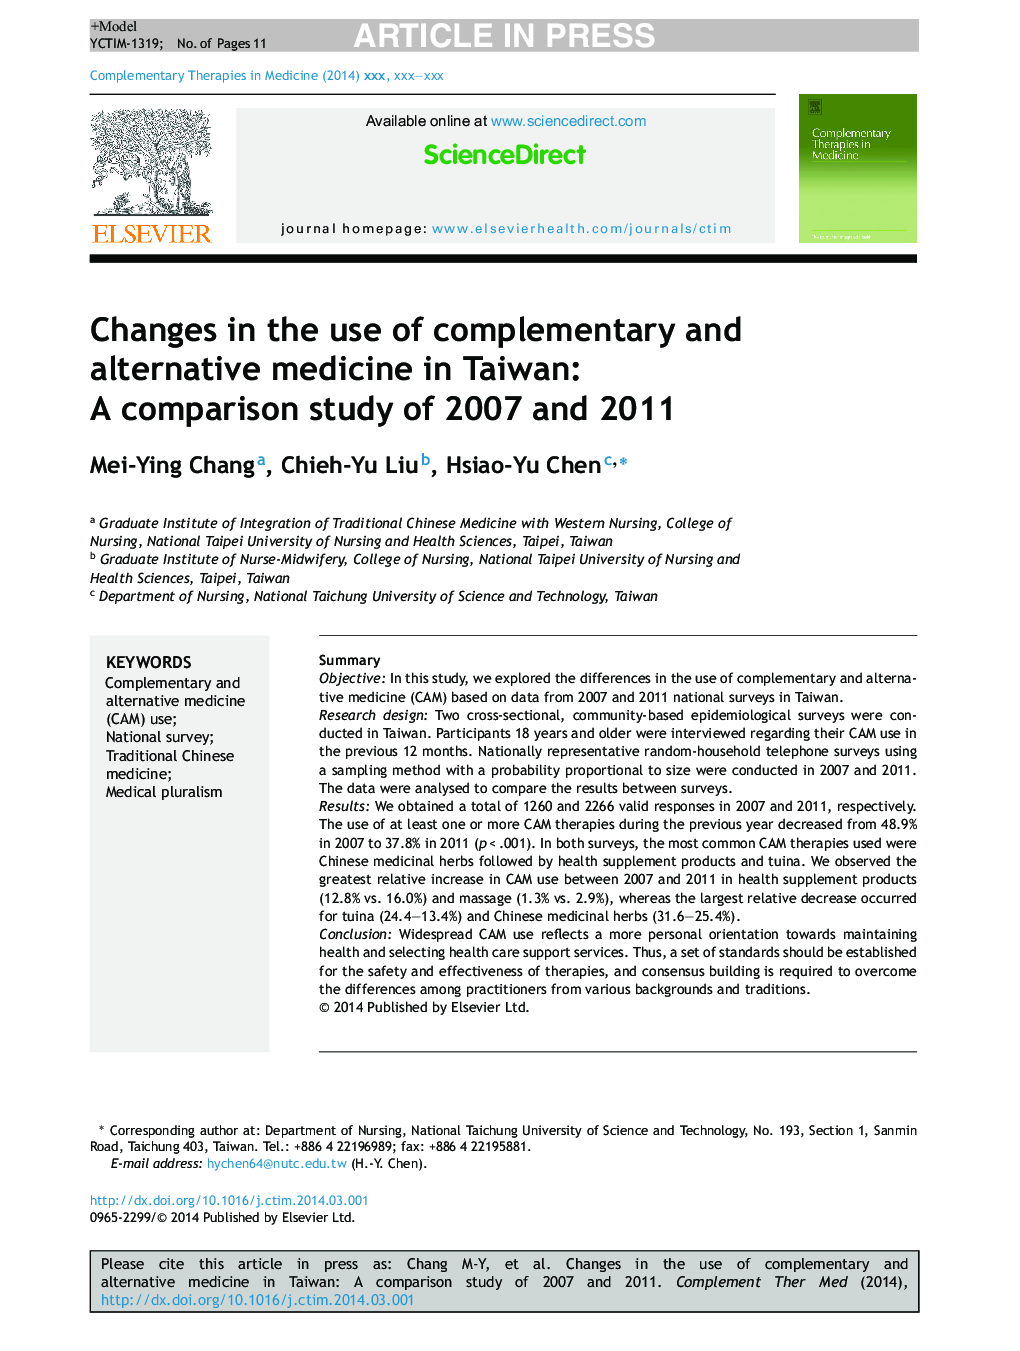 Changes in the use of complementary and alternative medicine in Taiwan: A comparison study of 2007 and 2011